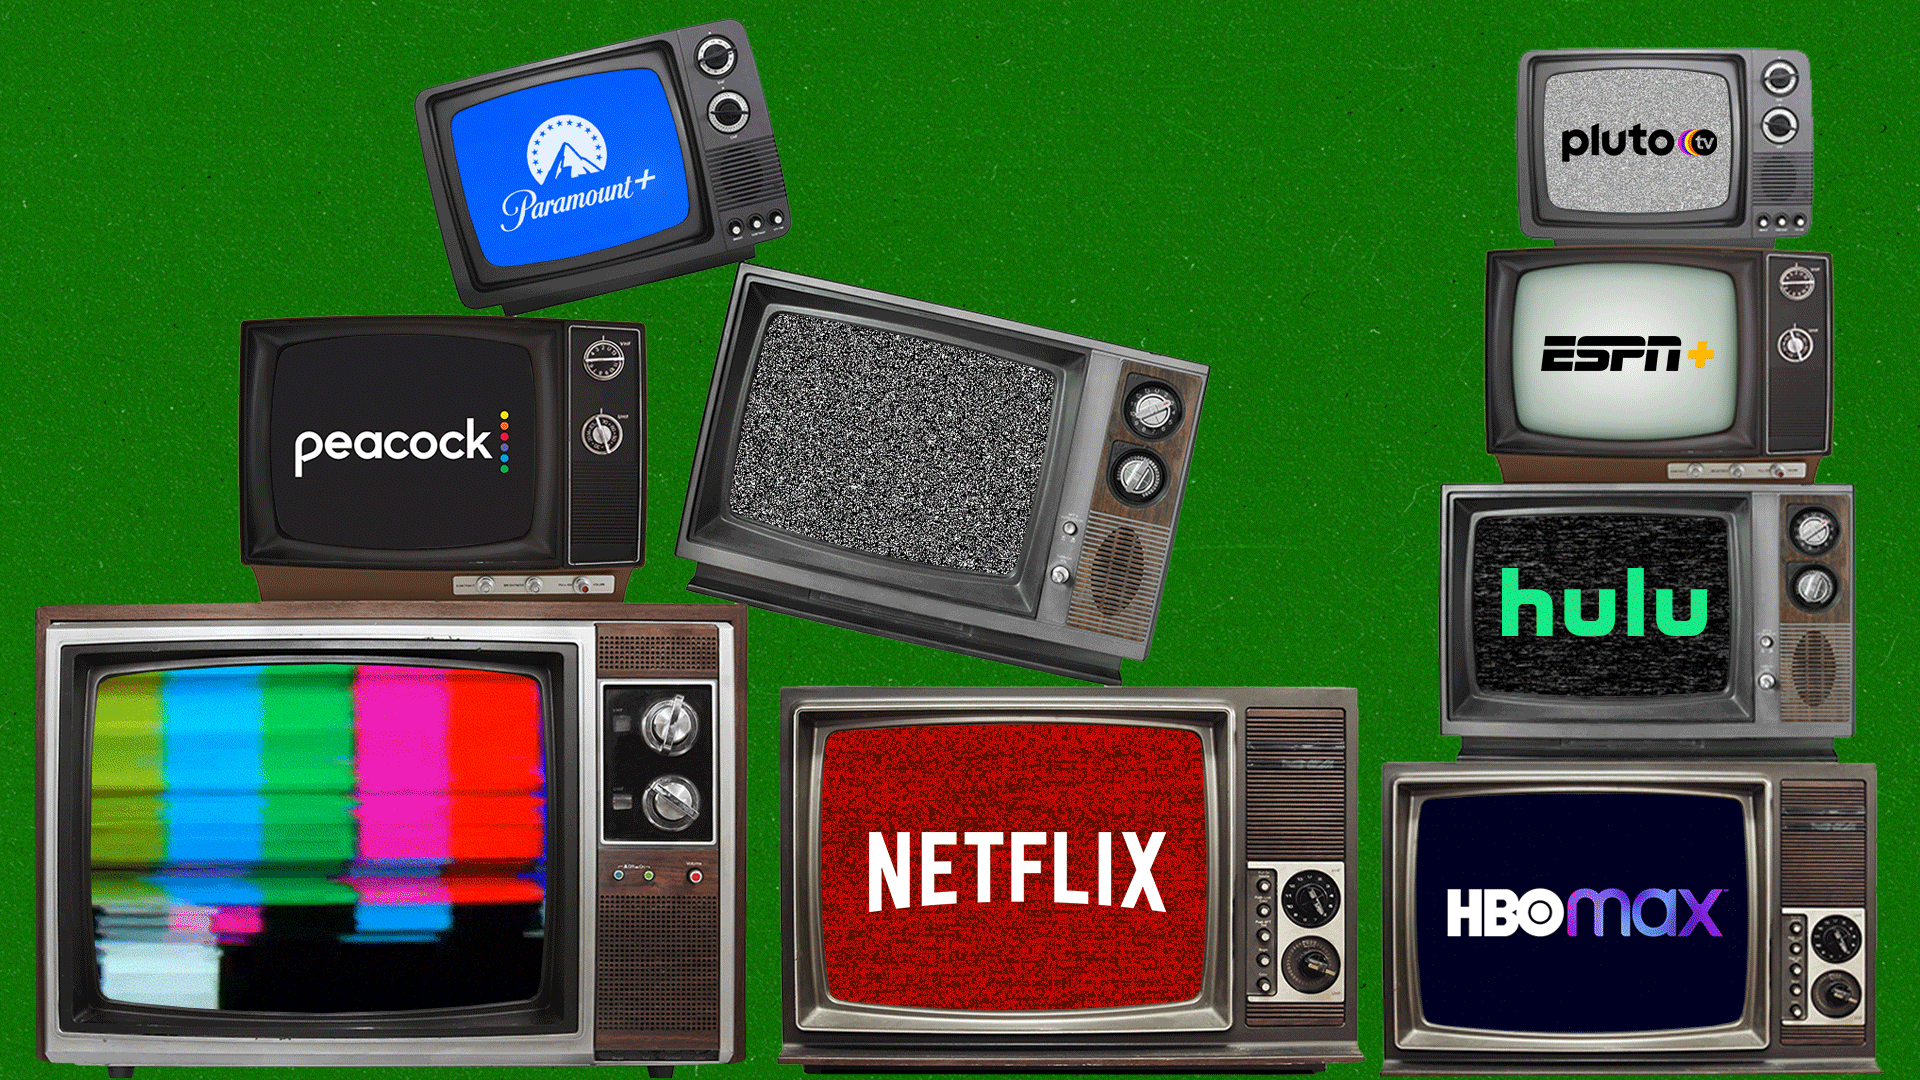 Peacock, Paramount+ are eating into Netflix’s market share. Here’s what it means for advertisers.